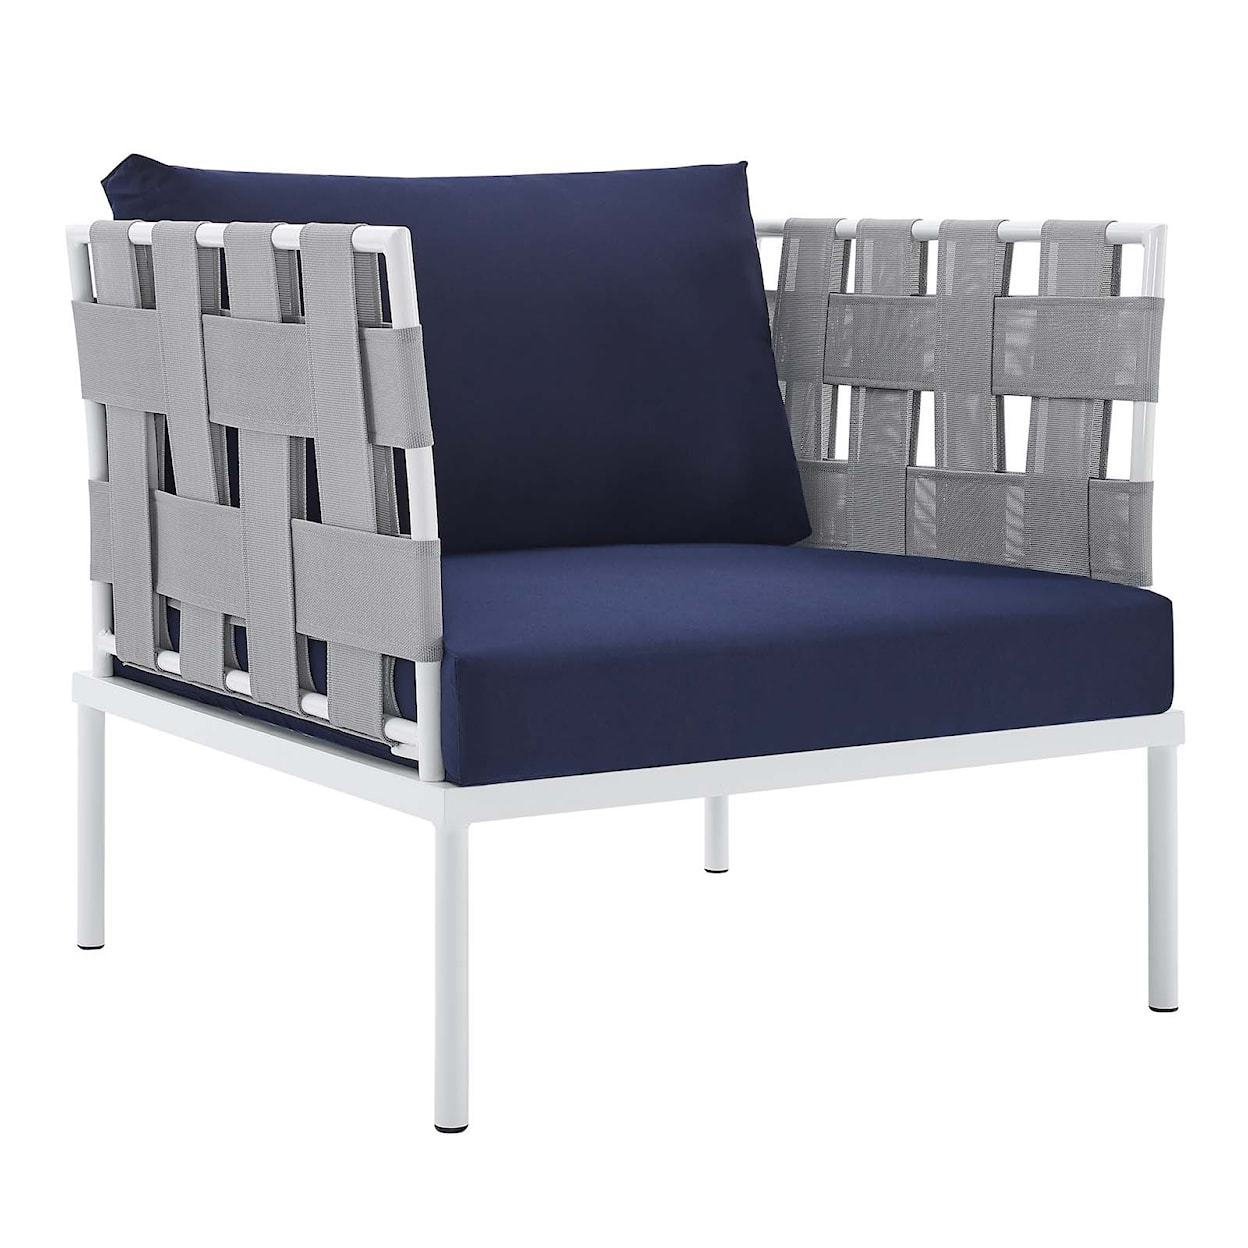 Modway Harmony Outdoor 3-Piece Seating Set